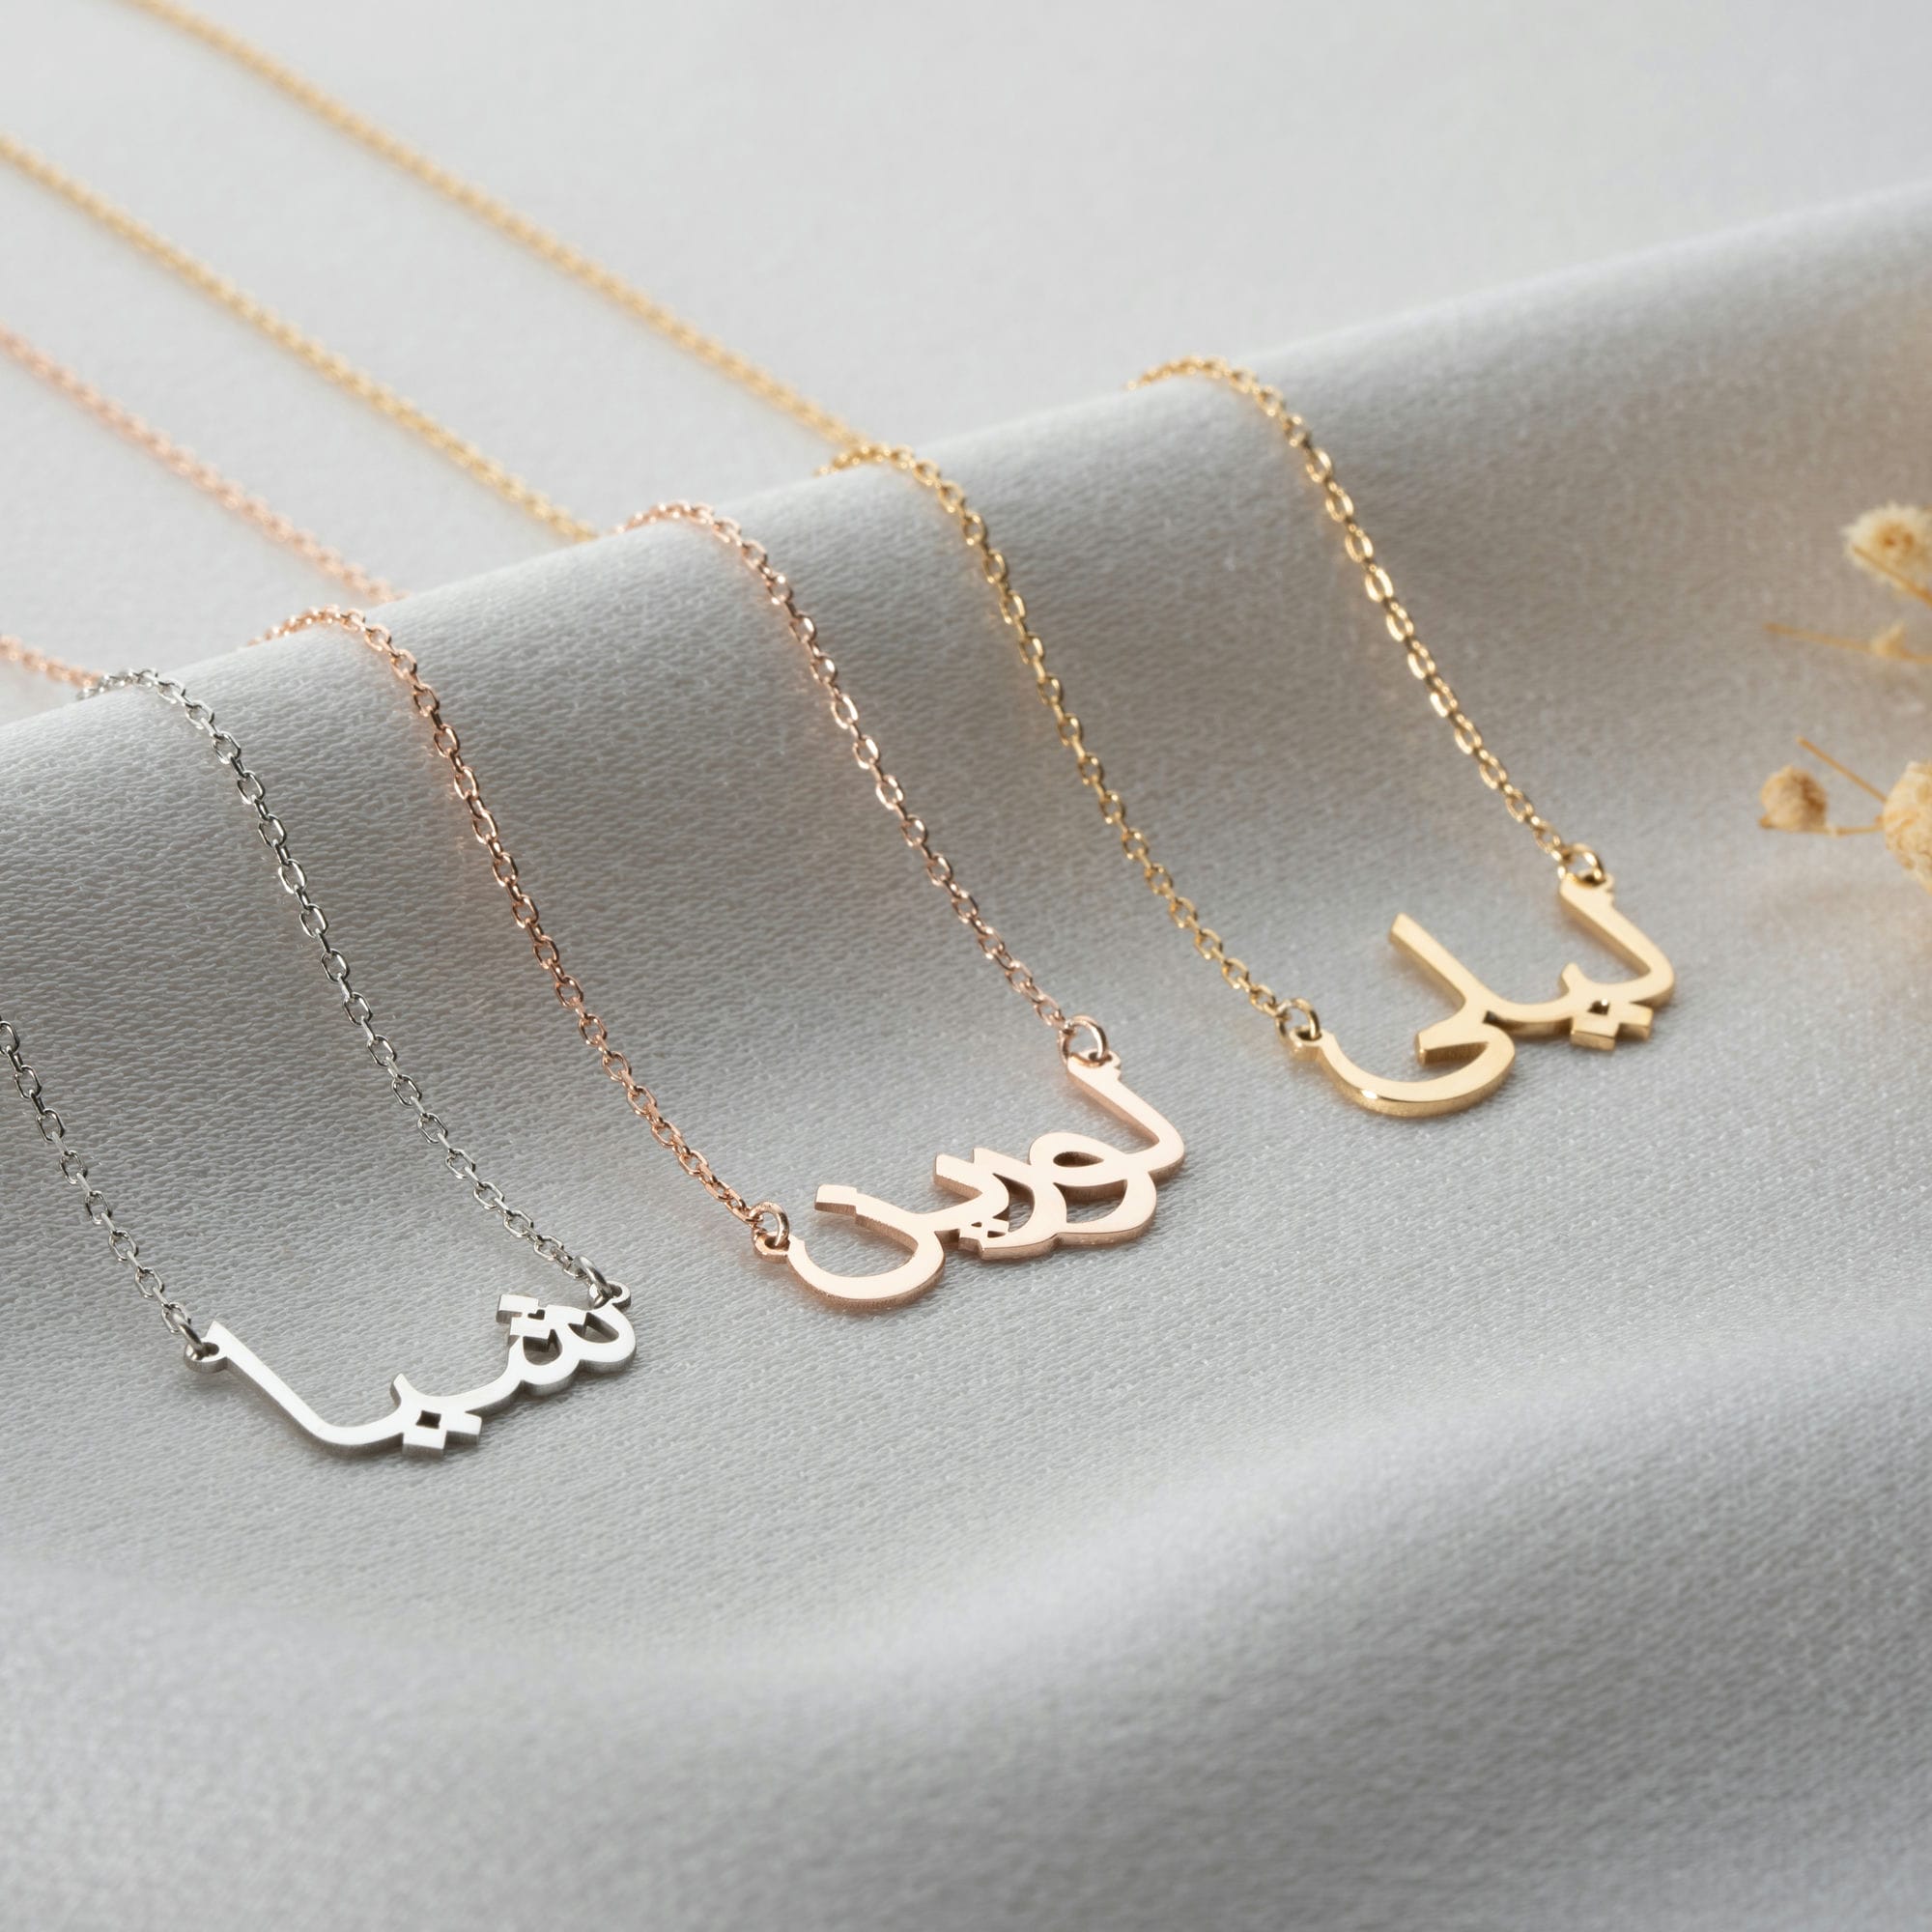 Buy - Arabic Name Necklace,Personalised Arabic Calligraphy Name Necklace On  V Perfumes